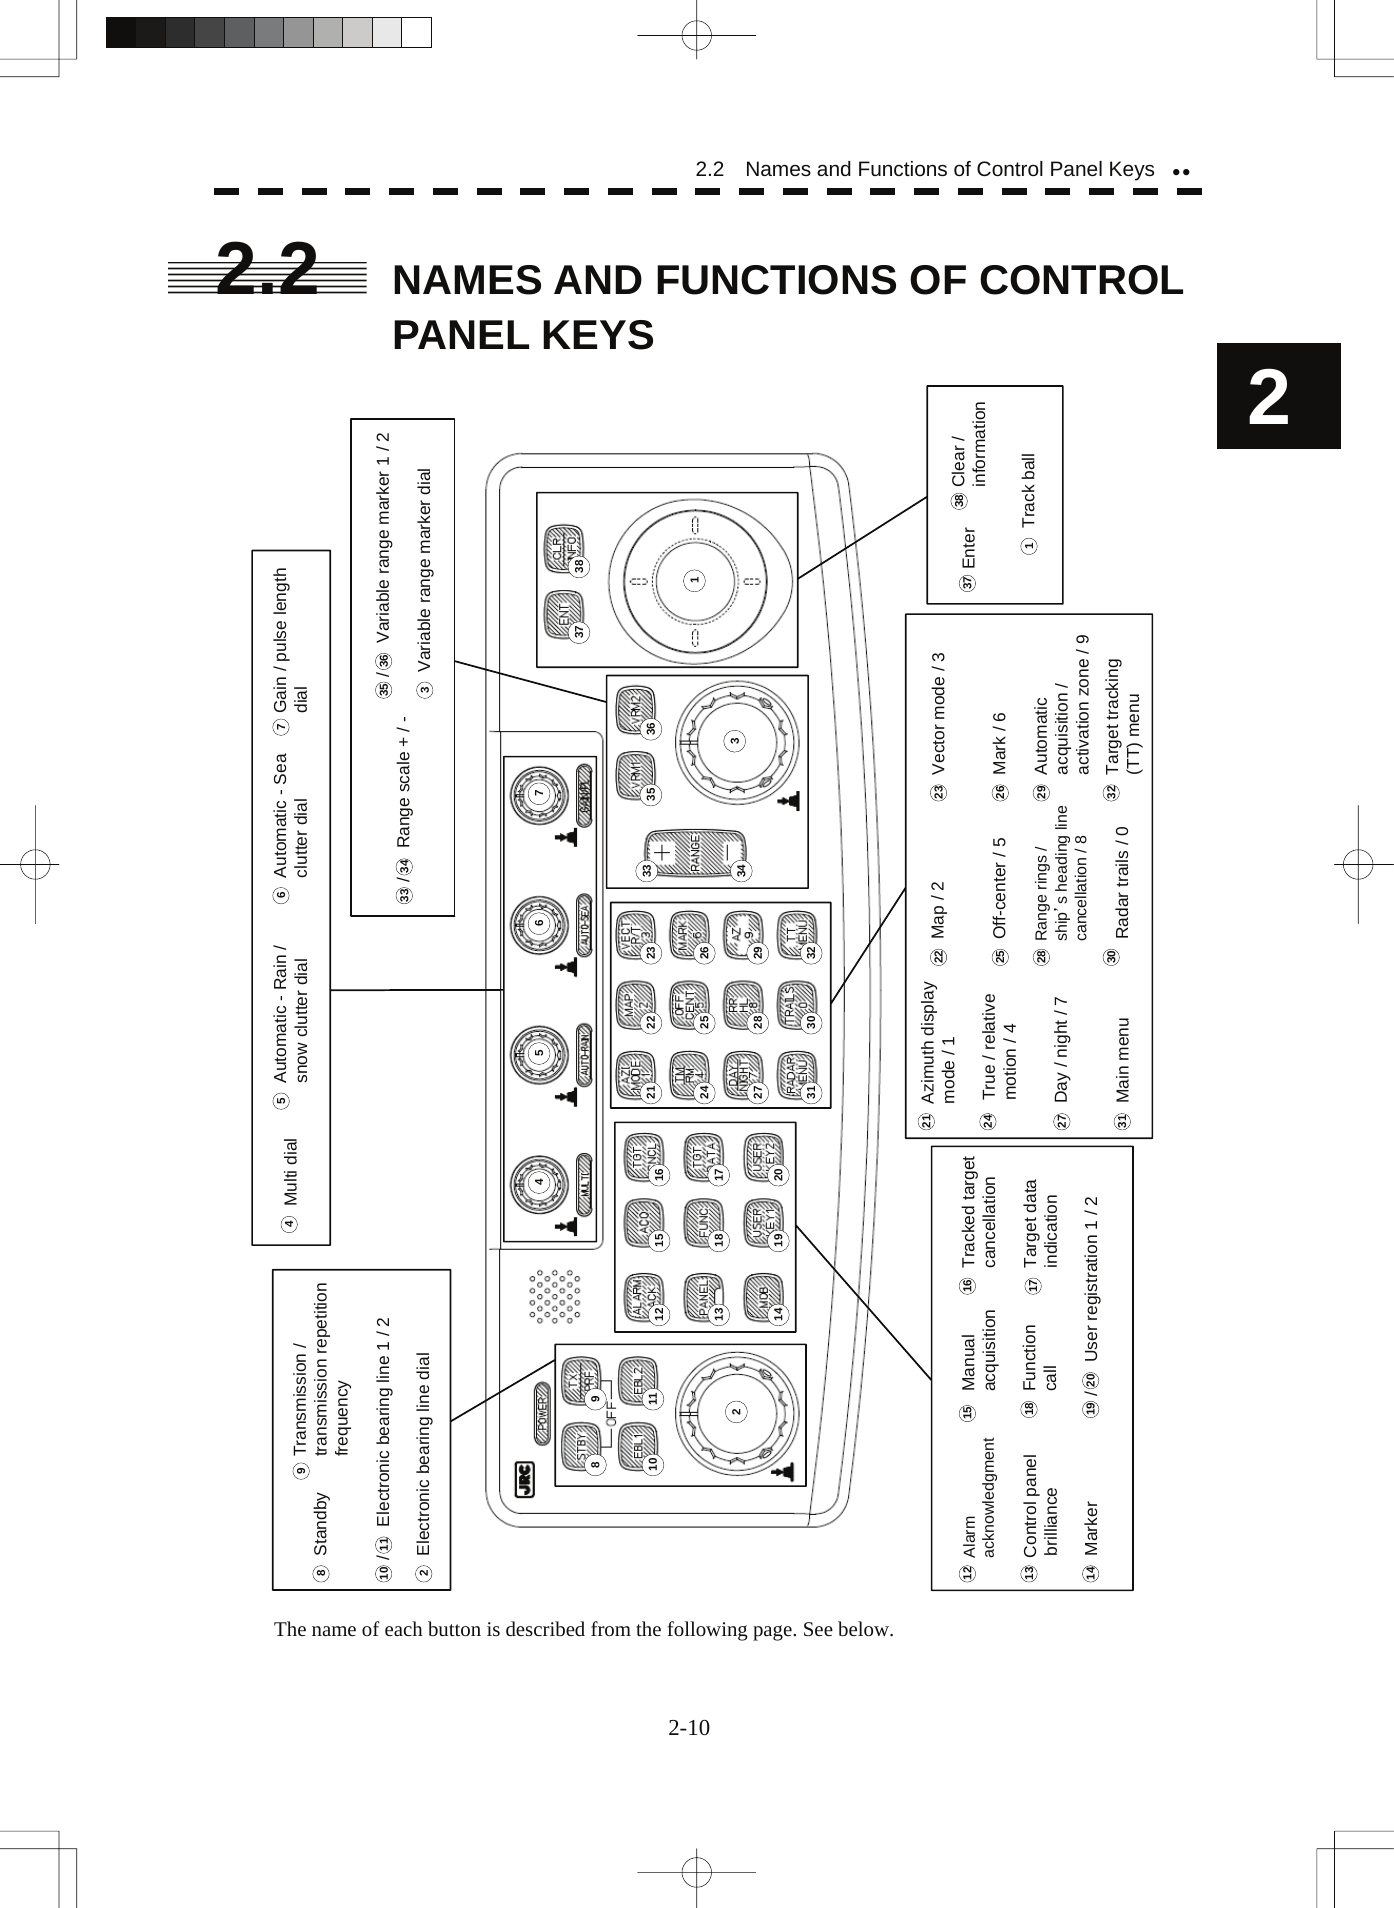  2 2.2    Names and Functions of Control Panel Keysyy2.2  NAMES AND FUNCTIONS OF CONTROL PANEL KEYS  1234 5 6 78 910201918 17161514131211 21 22 2324 25 2627 28 293031 32333435 3637 38Multi dial     EnterElectronic bearing line dialFunctioncall    /      User registration 1 / 2Transmission /transmission repetition frequencyAlarmacknowledgment    /      Electronic bearing line 1 / 2StandbyAutomatic - Rain /snow clutter dial Automatic - Seaclutter dial      Gain / pulse lengthdialMarkerControl panel     brilliance      Target dataindicationTracked targetcancellationManualacquisitionAzimuth displaymode / 1Day / night / 7True / relativemotion / 4Map / 2     Range rings /     ship’s heading linecancellation / 8Off-center / 5Vector mode / 3Automaticacquisition /activation zone / 9Mark / 6Main menu Radar trails / 0 Target tracking(TT) menuClear /information2456 78910201918 1716151413121122 2324 25 262728 293031 3237 3821Track ball1    /      Variable range marker 1 / 2Variable range marker dial    /      Range scale + / -333 3435 36  The name of each button is described from the following page. See below. 2-10 